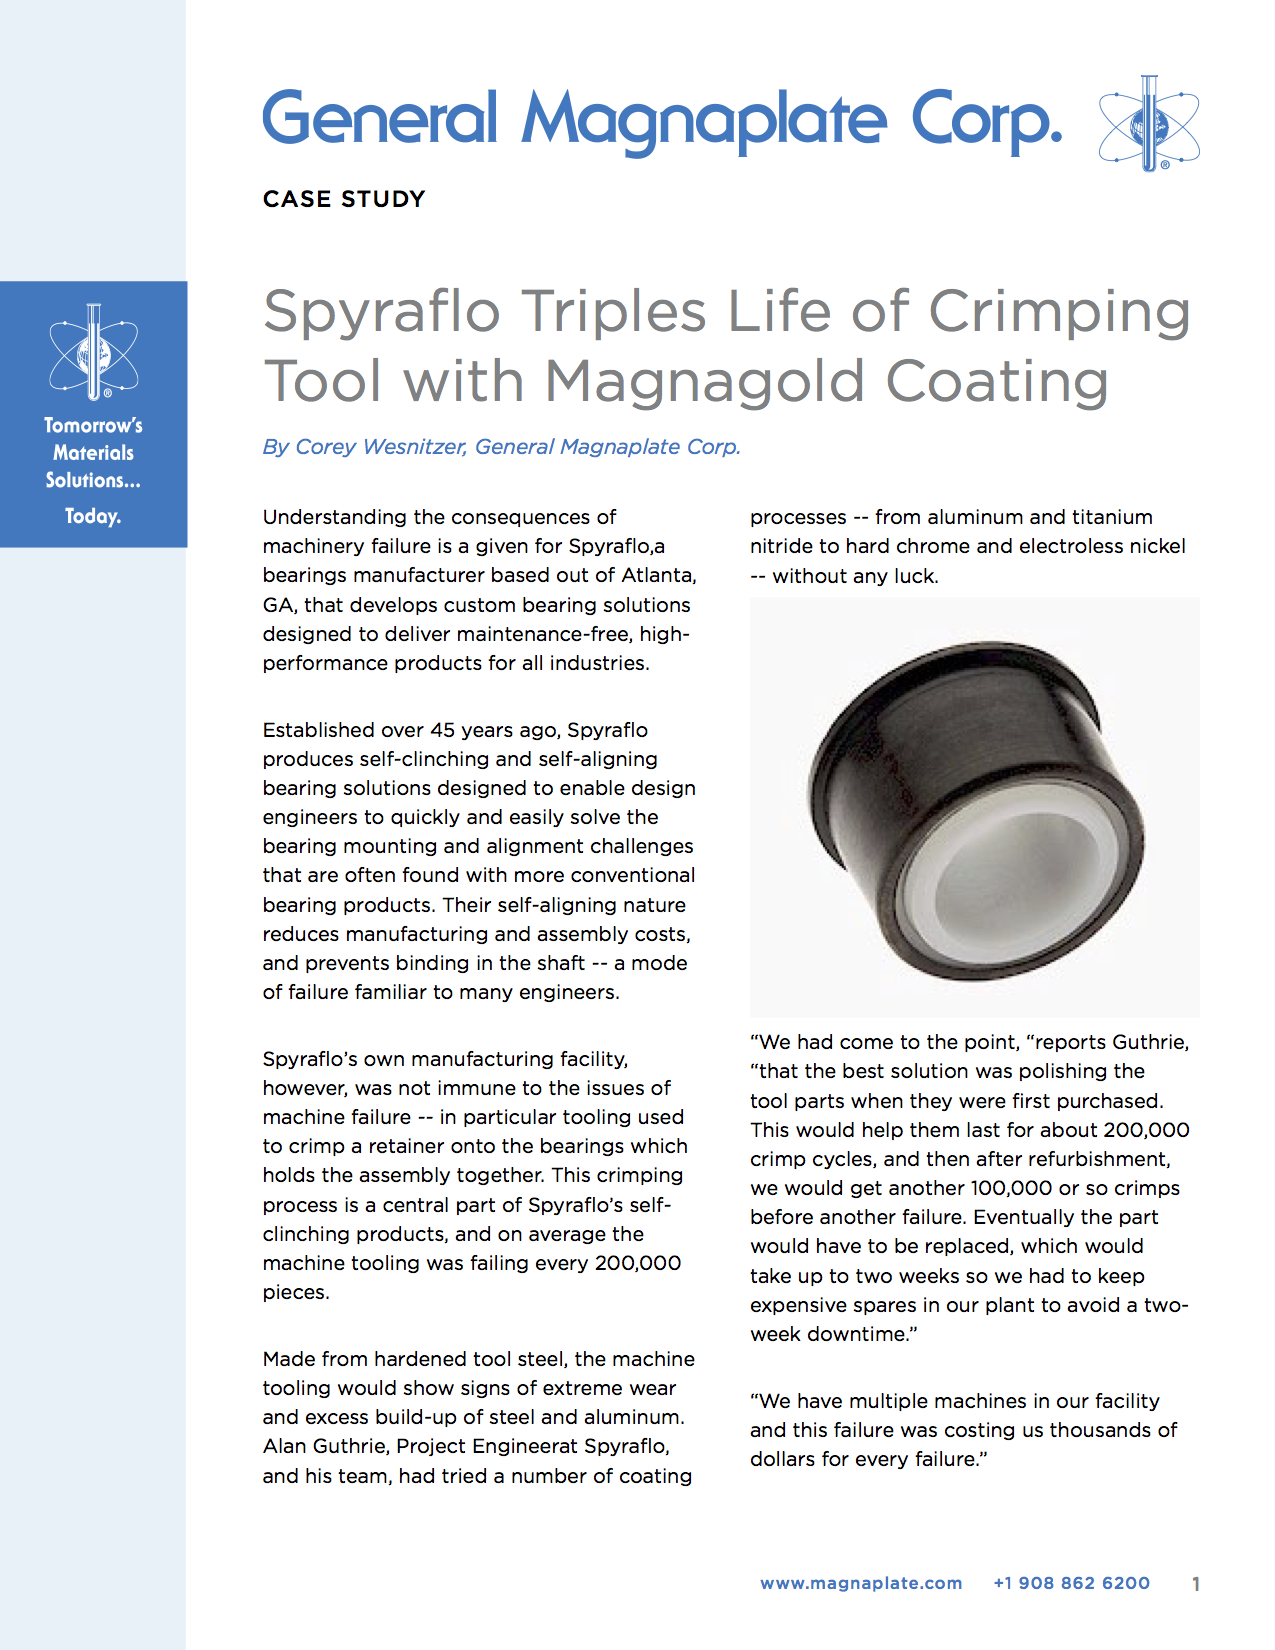 Engineered Coating For Extreme Wear And Tight Tolerances